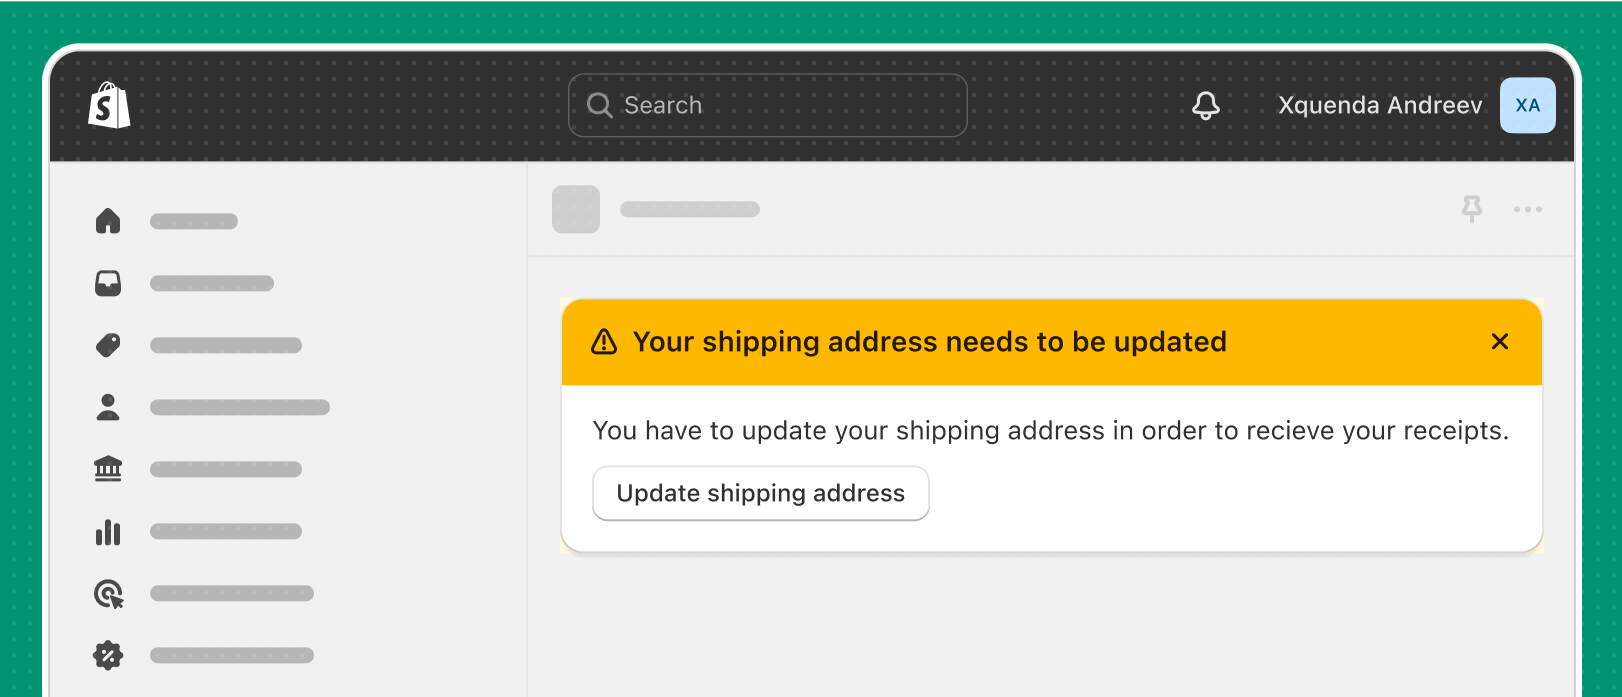 A warning banner in yellow that reads "Your shipping address needs to be updated" and includes a button that's labeled "Update shipping address".